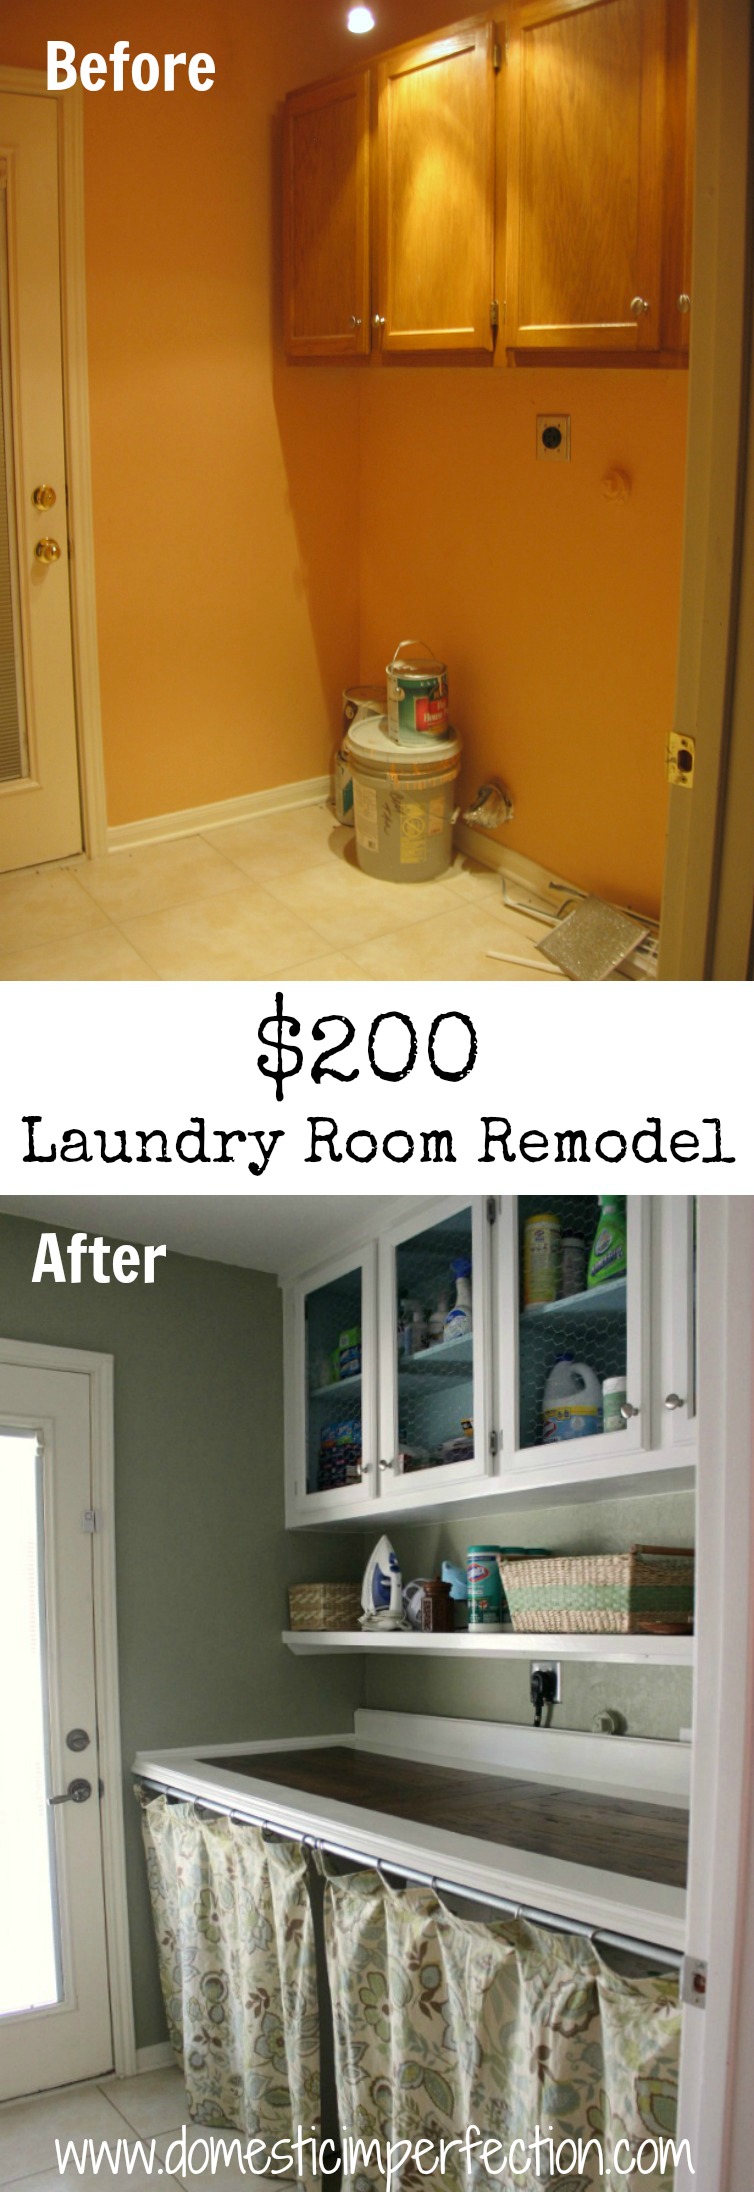 great ideas for remodeling on a budget and using what you have